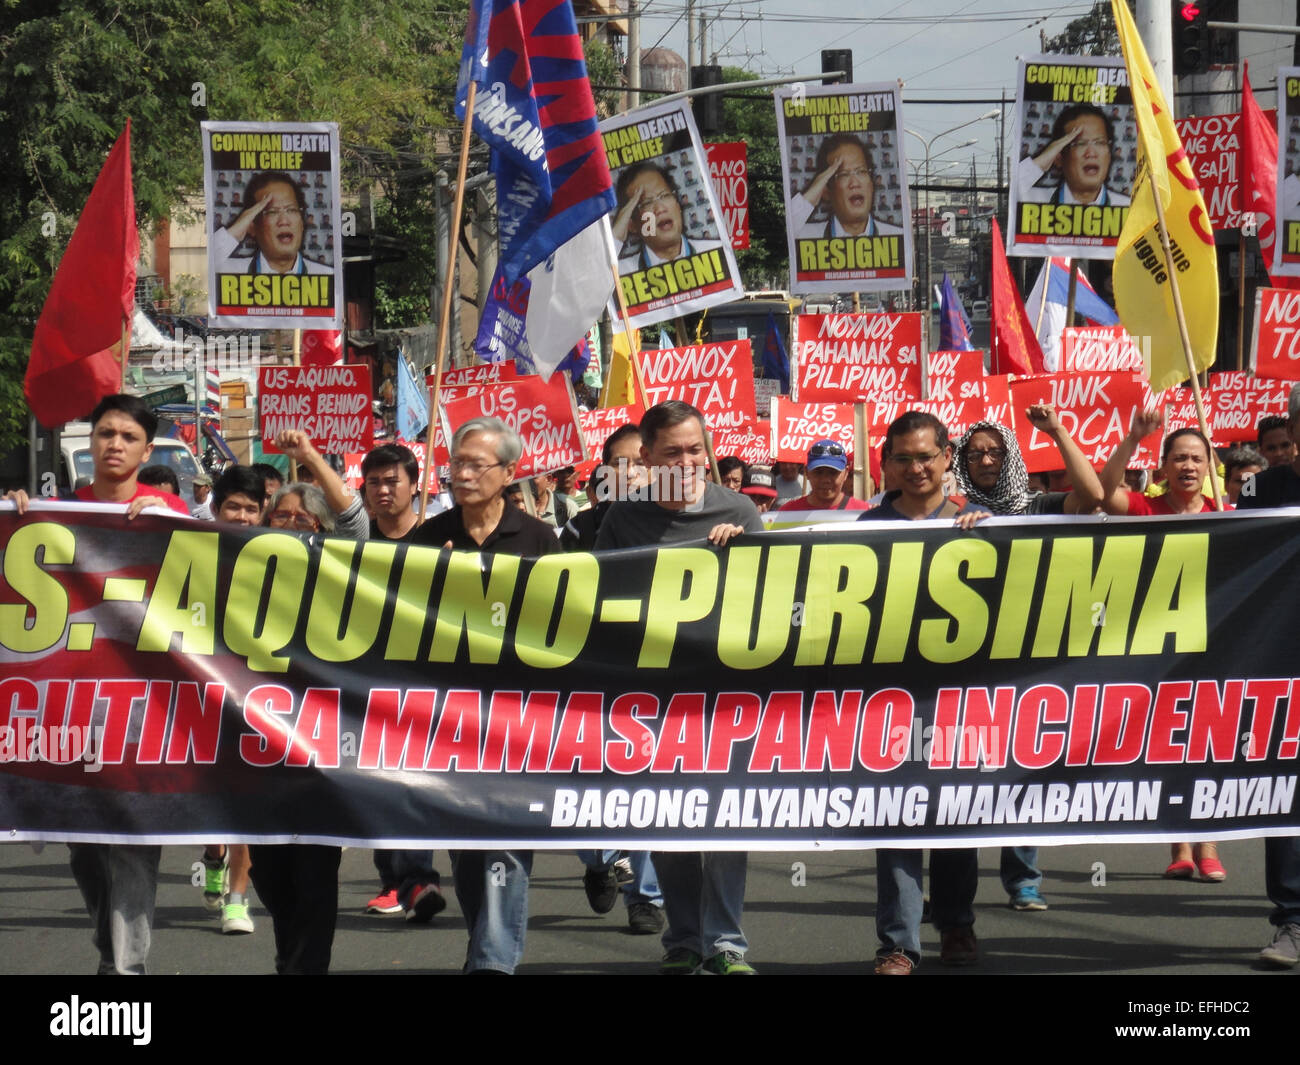 Protesters begin to approach Ayala Bridge as they march to the US Embassy. Protesters accused President Benigno Aquino III, suspended police chief Alan Purisinma, and the US government of being involved in the botched anti-terror operation that killed 44 police commandos, 18 Moro rebels, and 7 civilians. The protest was held on the 116th anniversary of the Filipino-American War that claimed at least 600,000 lives. © Richard James Mendoza/Pacific Press/Alamy Live News Stock Photo